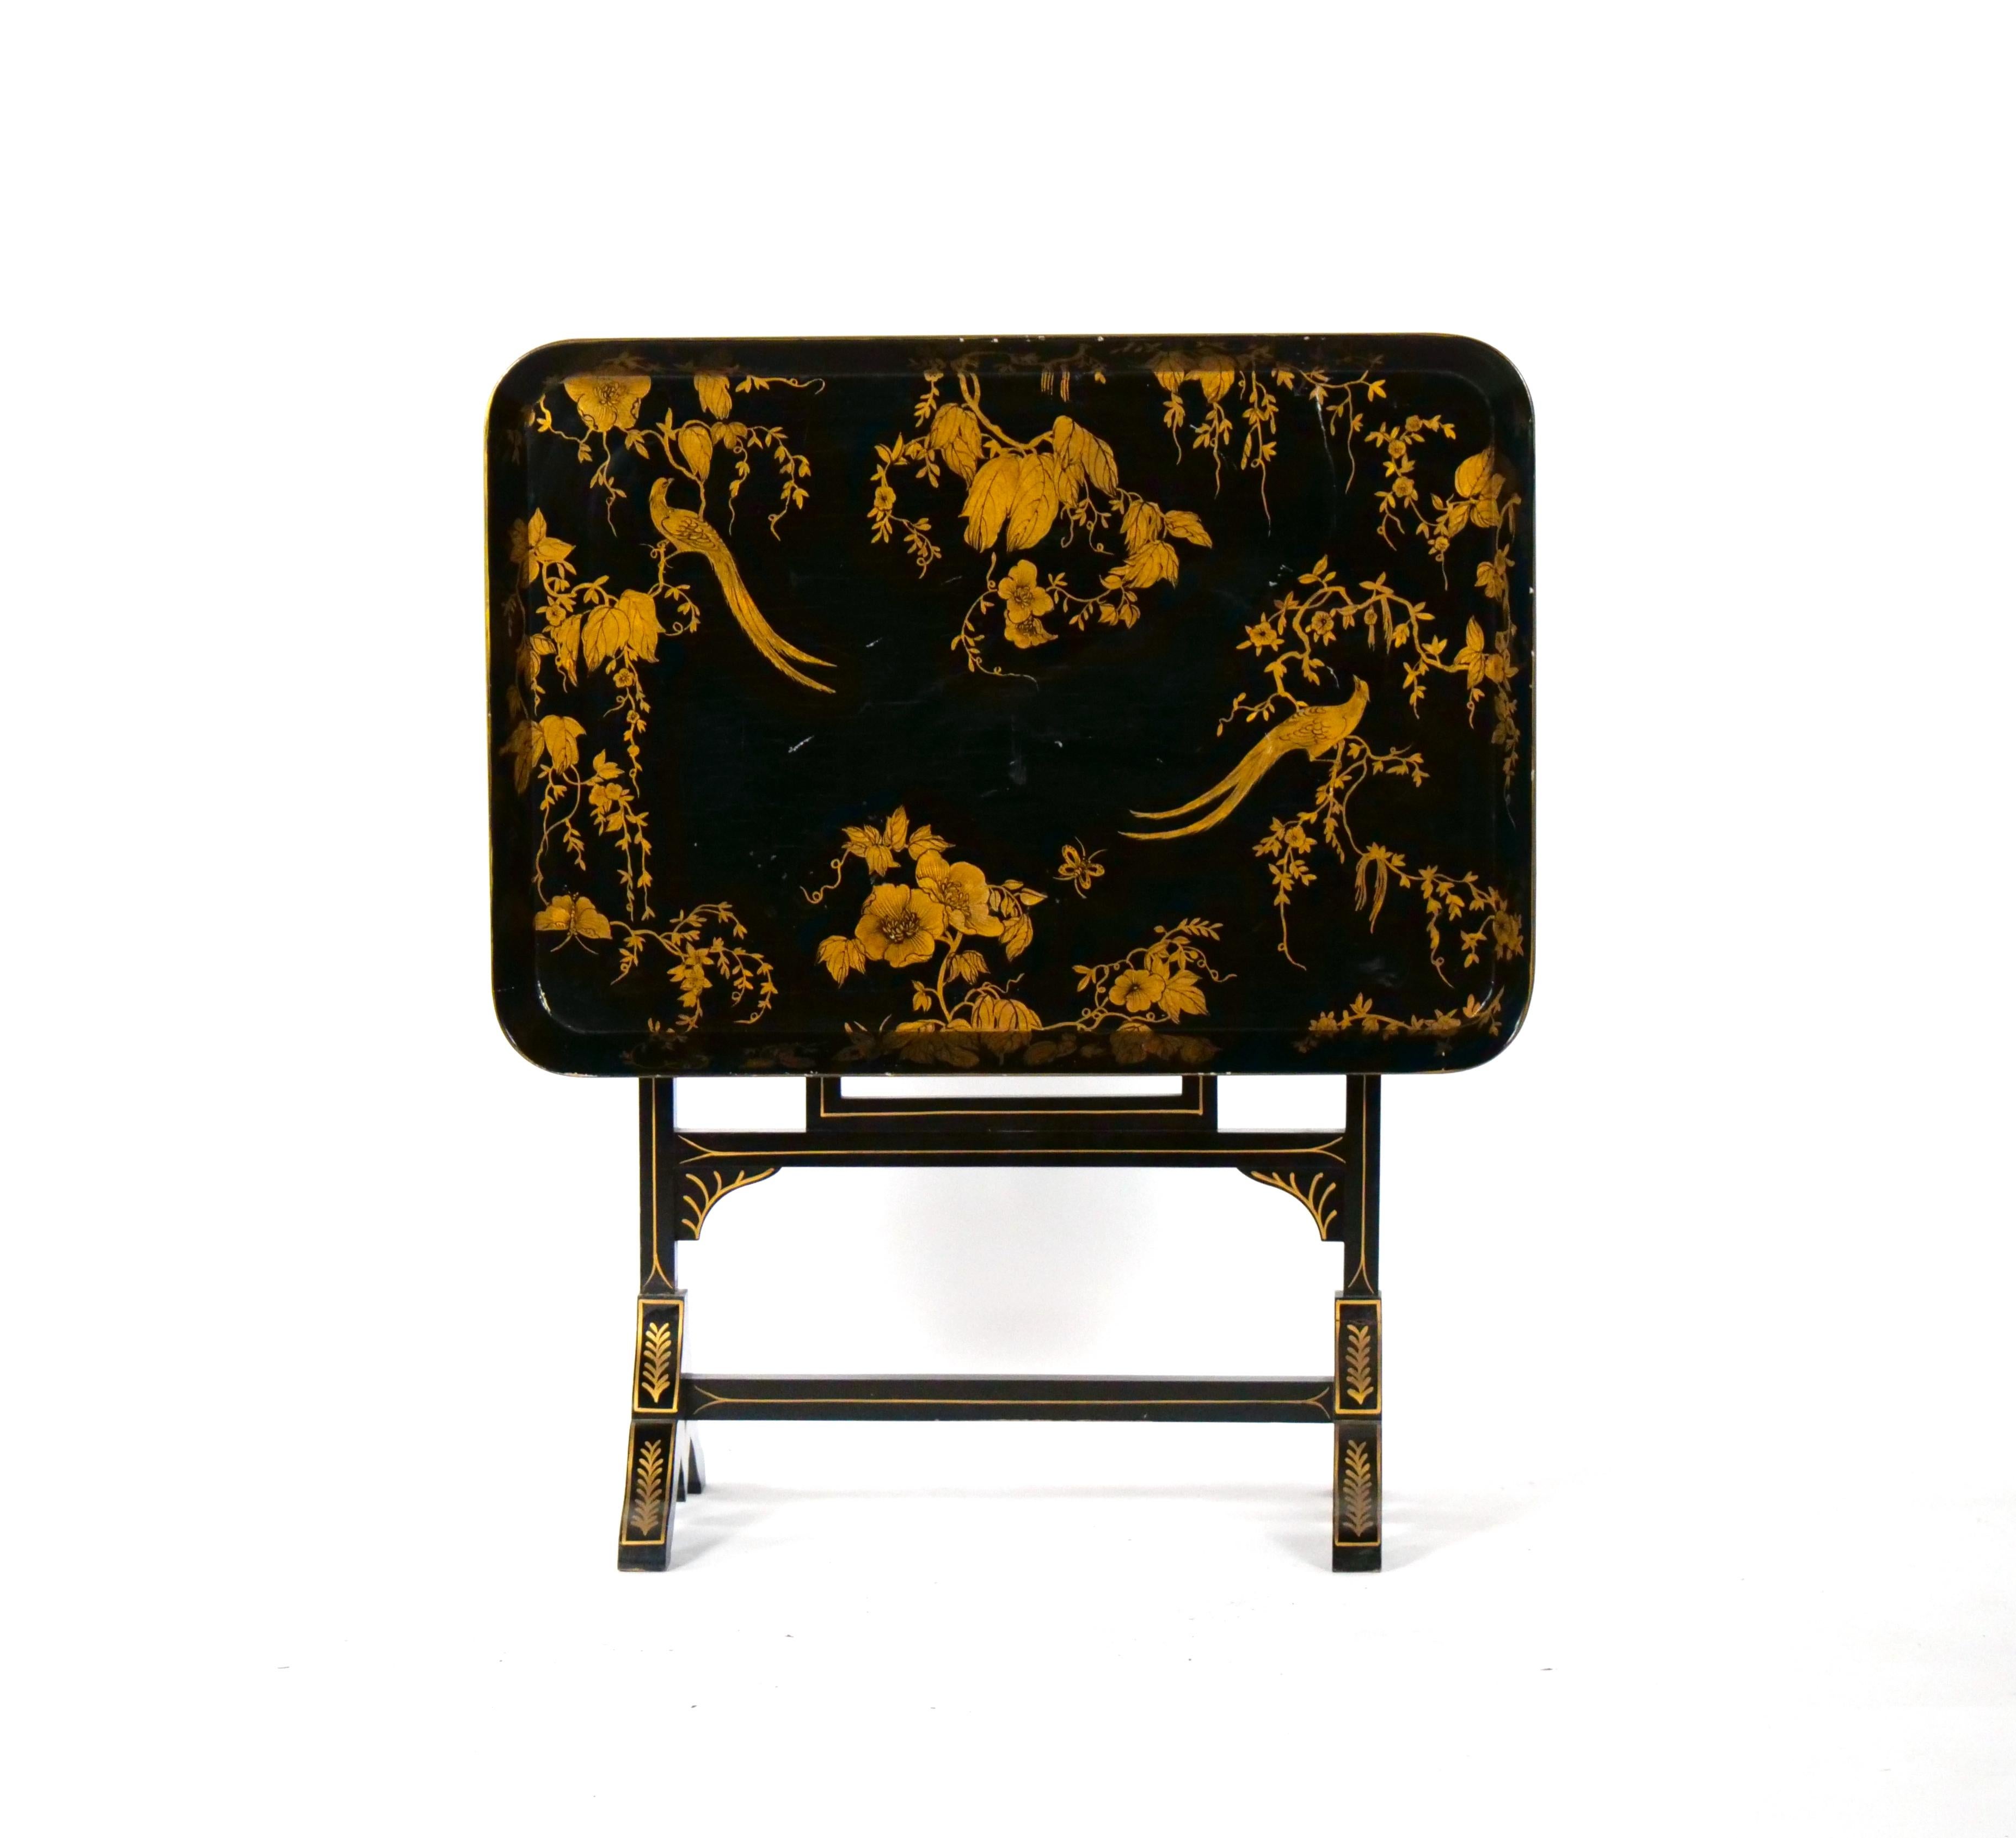 Beautiful Mid-20th Century Italian hand painted and gilt decorated floral and birds chinoiserie tray table. The tray is made with black lacquered wood, beautifully executed and handsomely hand painted with floral , birds , foliate and gild all